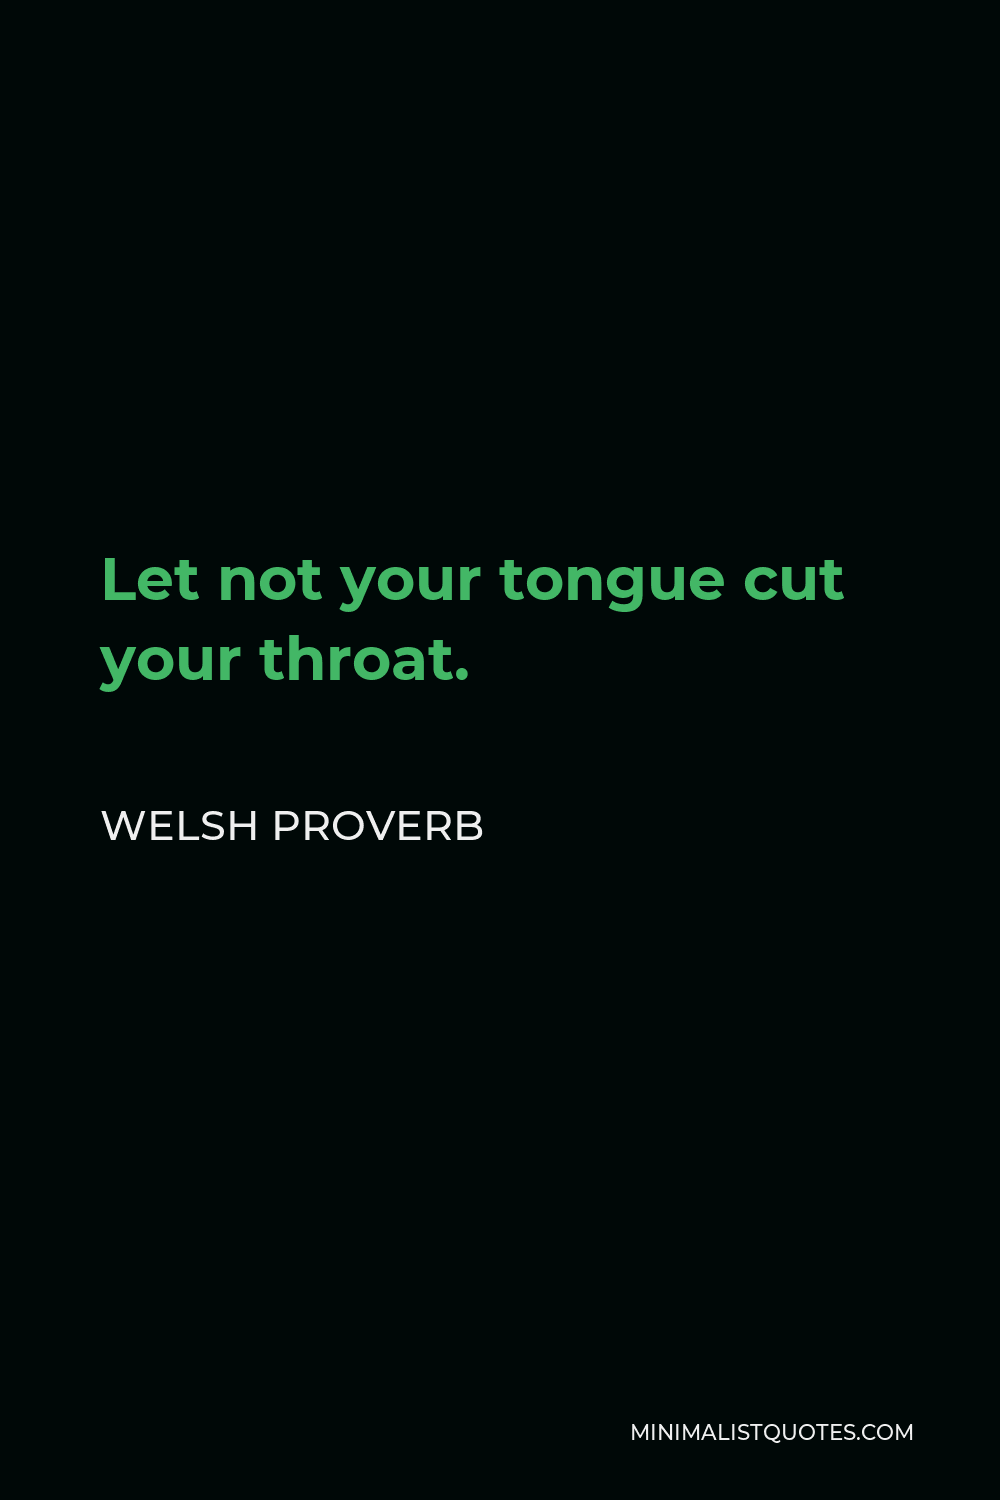 Welsh Proverb Quote - Let not your tongue cut your throat.